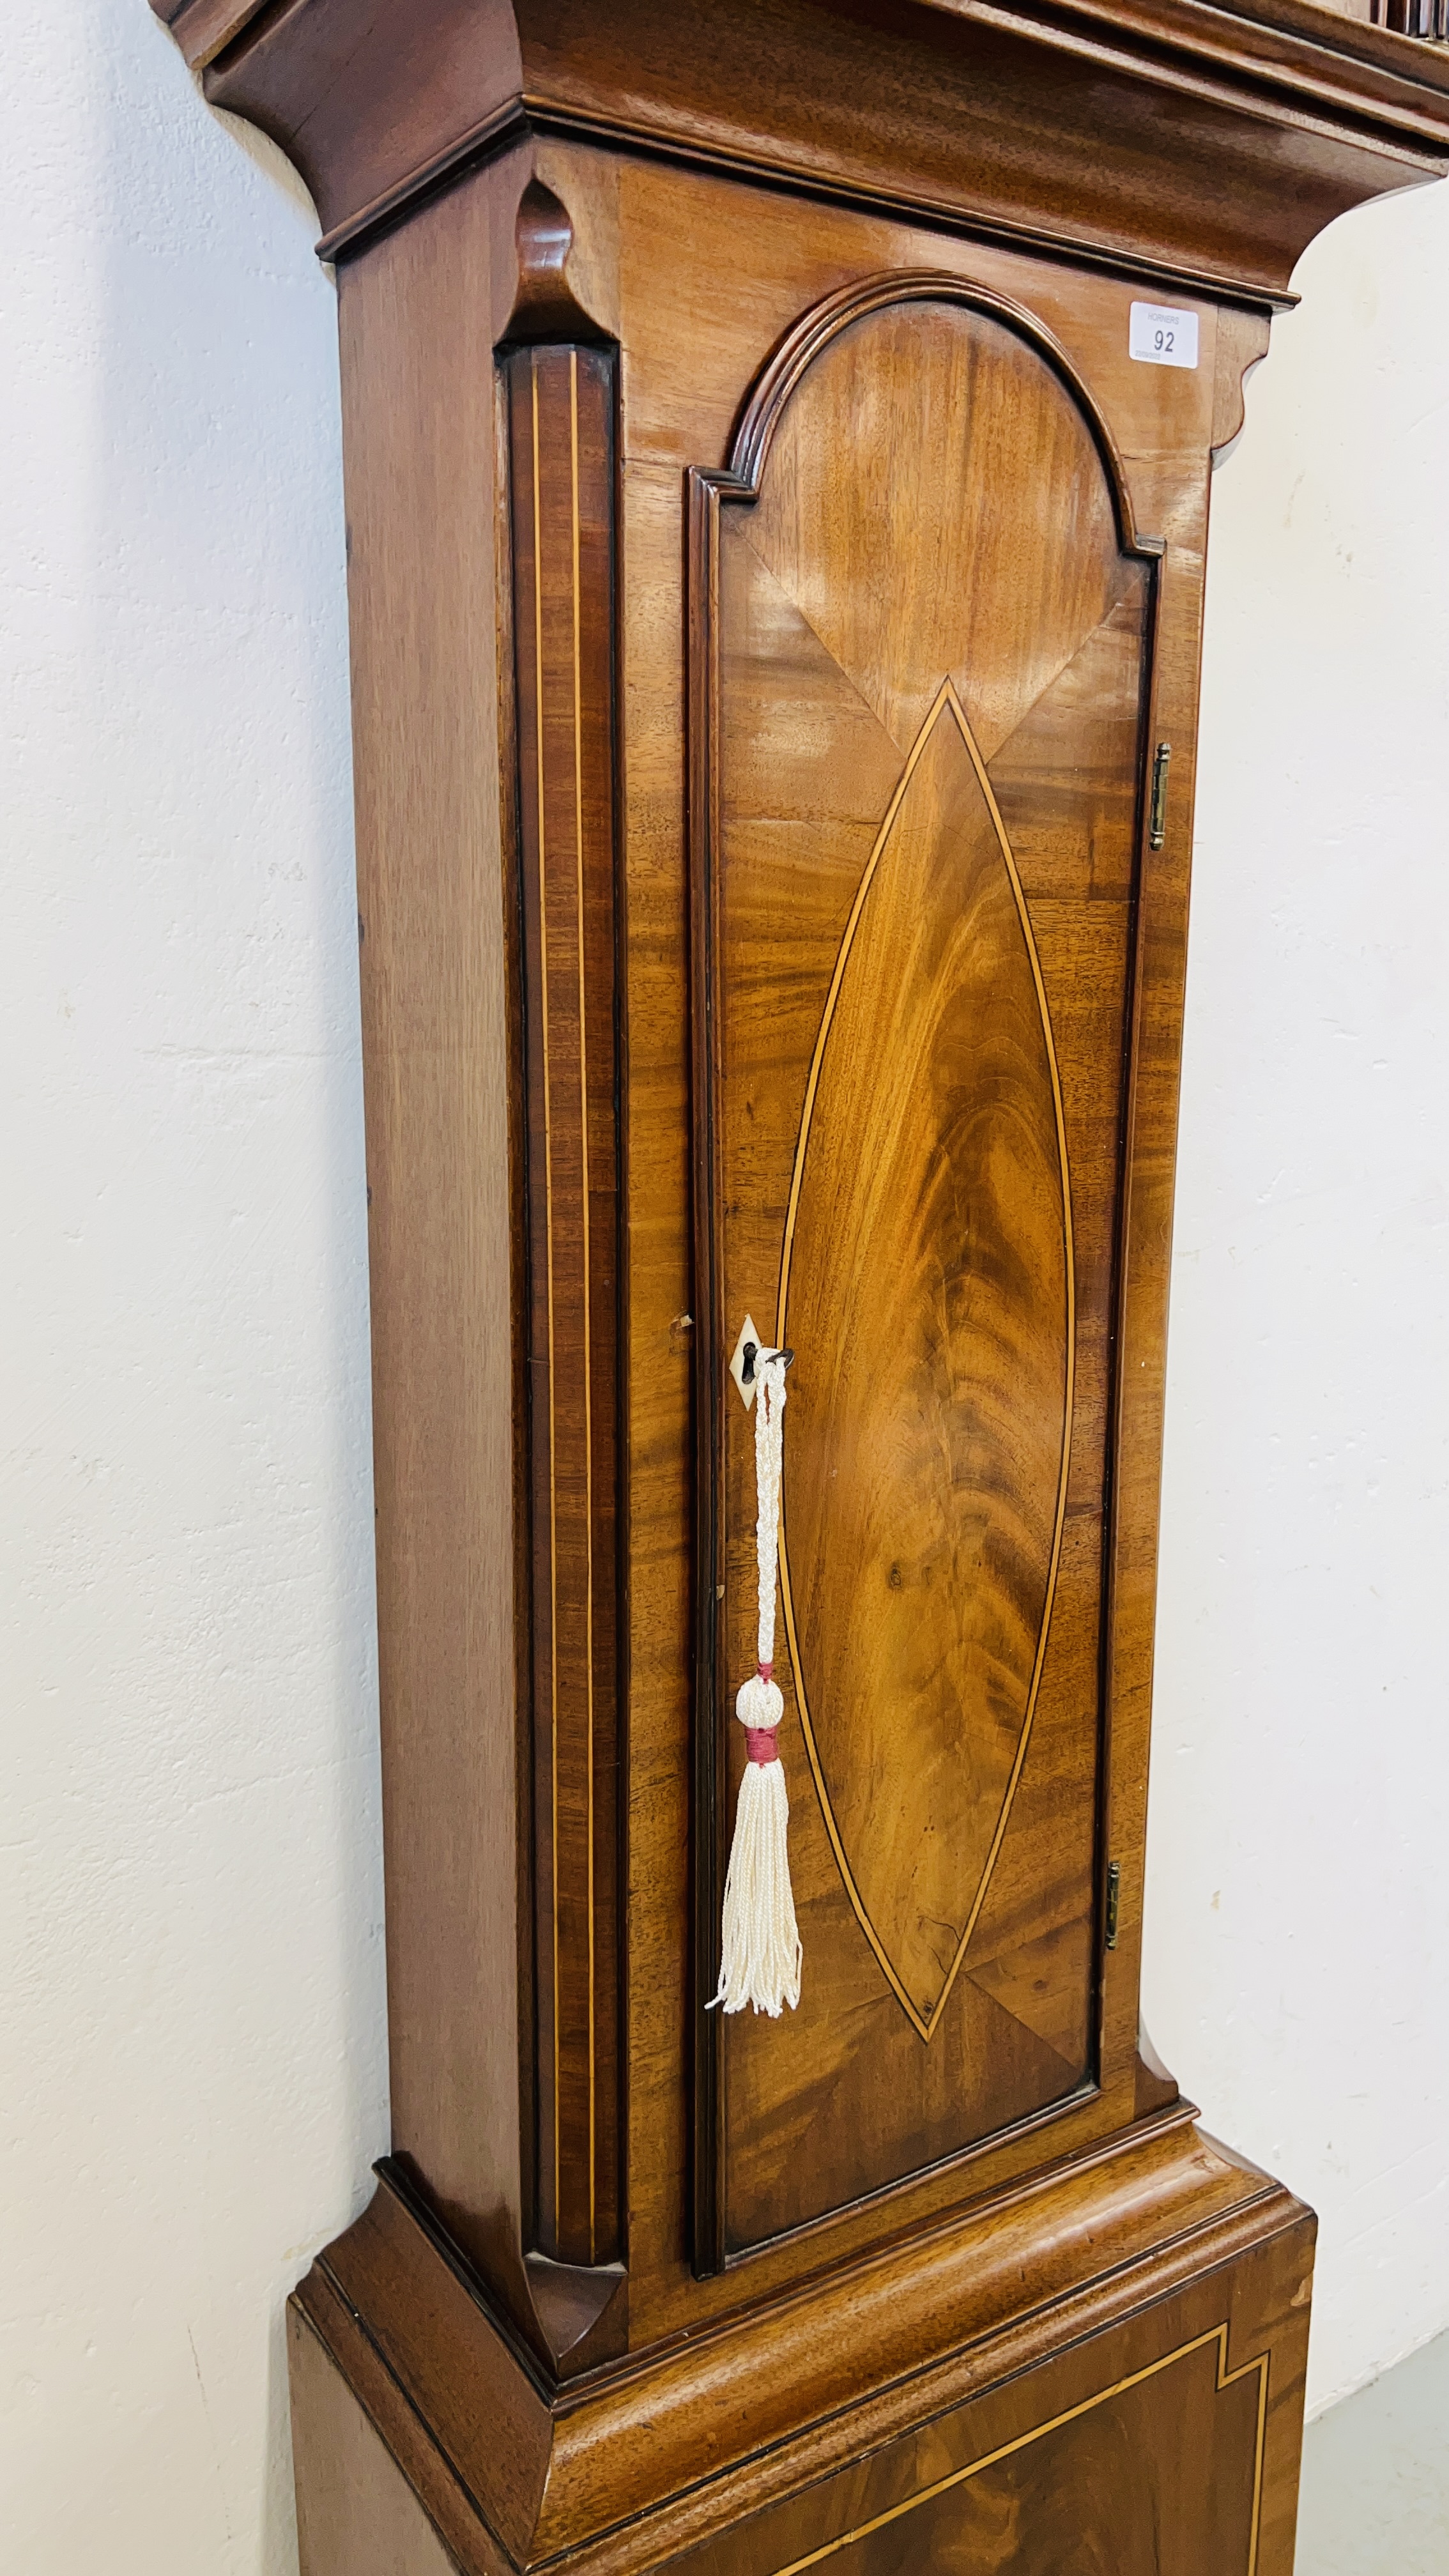 AN INLAID MAHOGANY GRANDFATHER CLOCK WITH JOSEPH LUM FACE COMPLETE WITH KEY AND PENDULUM - Image 5 of 14